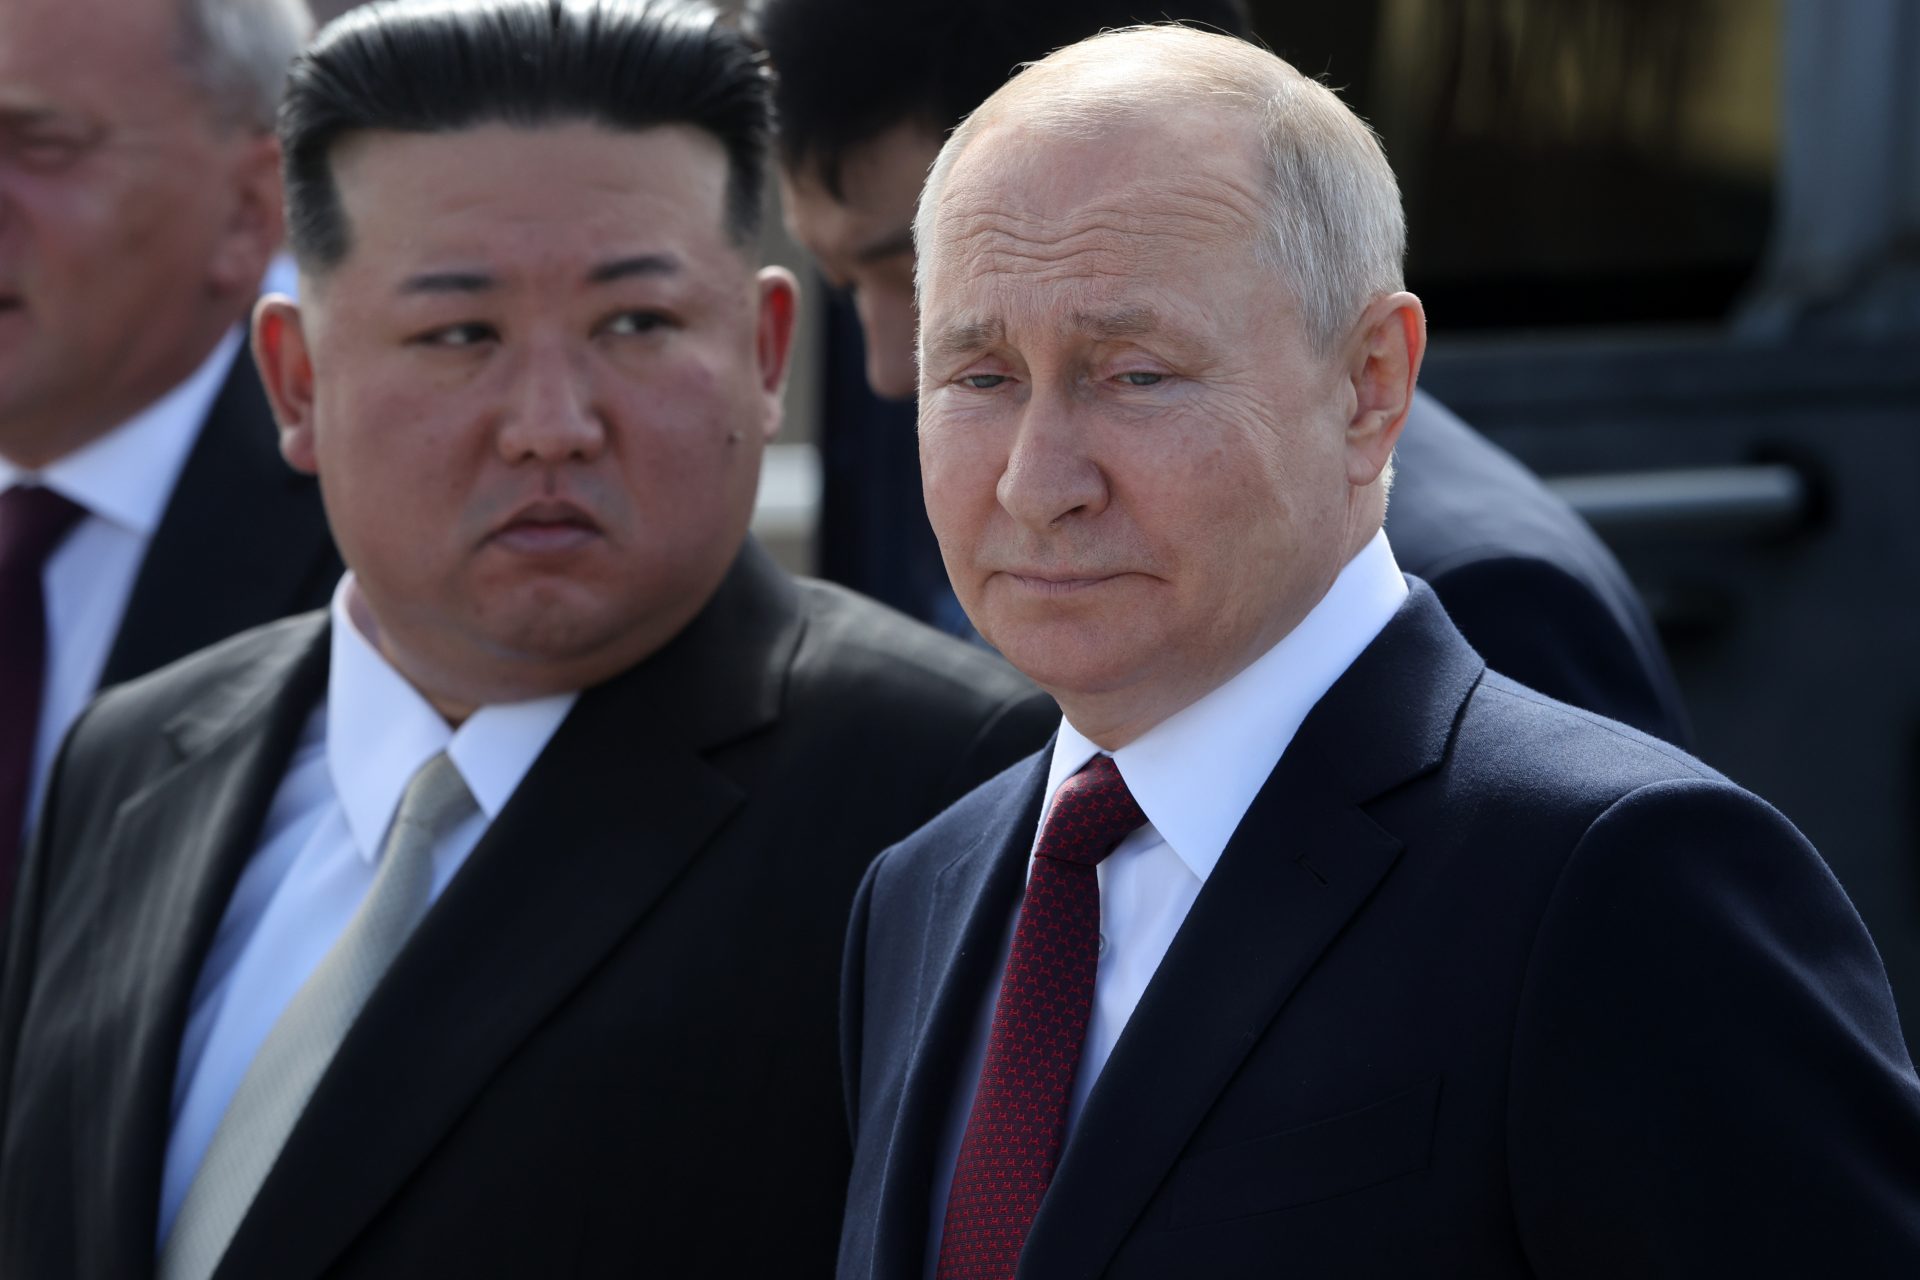 10. Iran and North Korea are enabling Russia’s invasion 